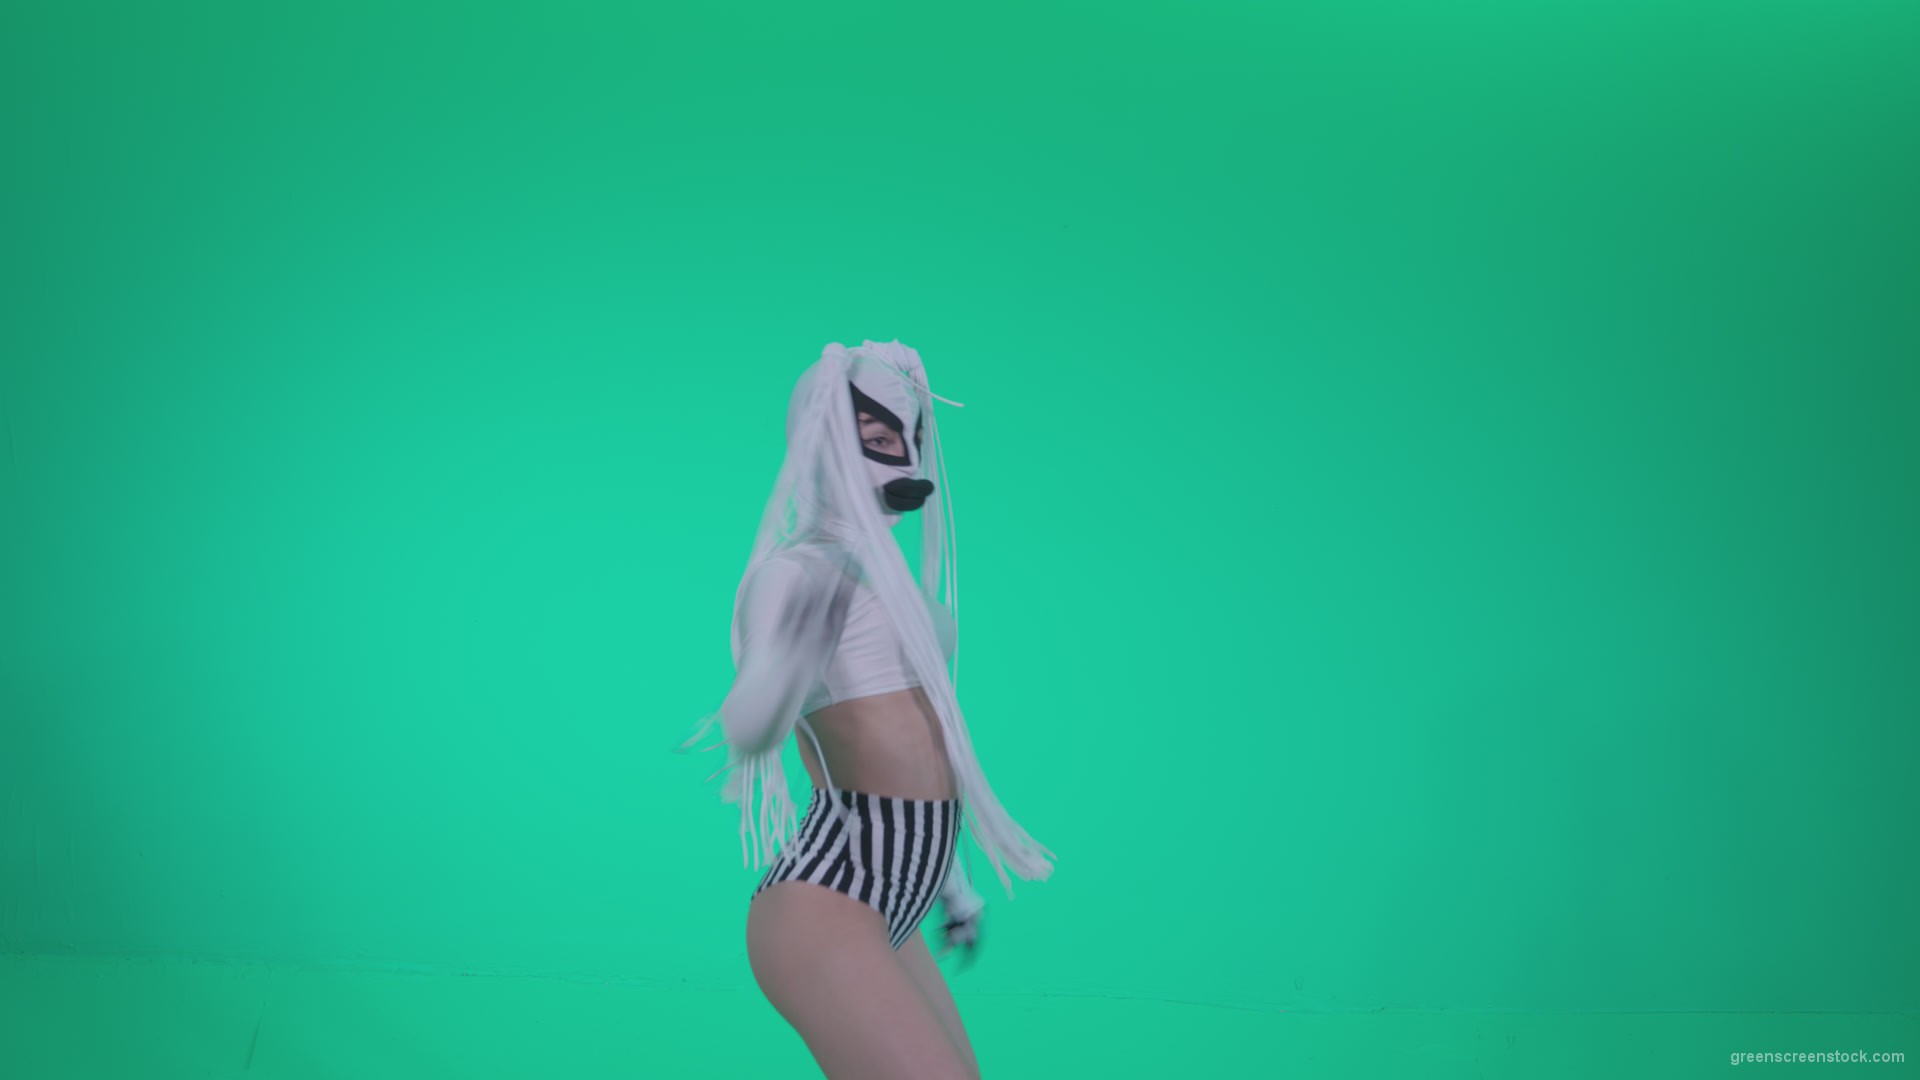 Go-go-Dancer-with-Latex-Top-t11-Green-Screen-Video-Footage_002 Green Screen Stock